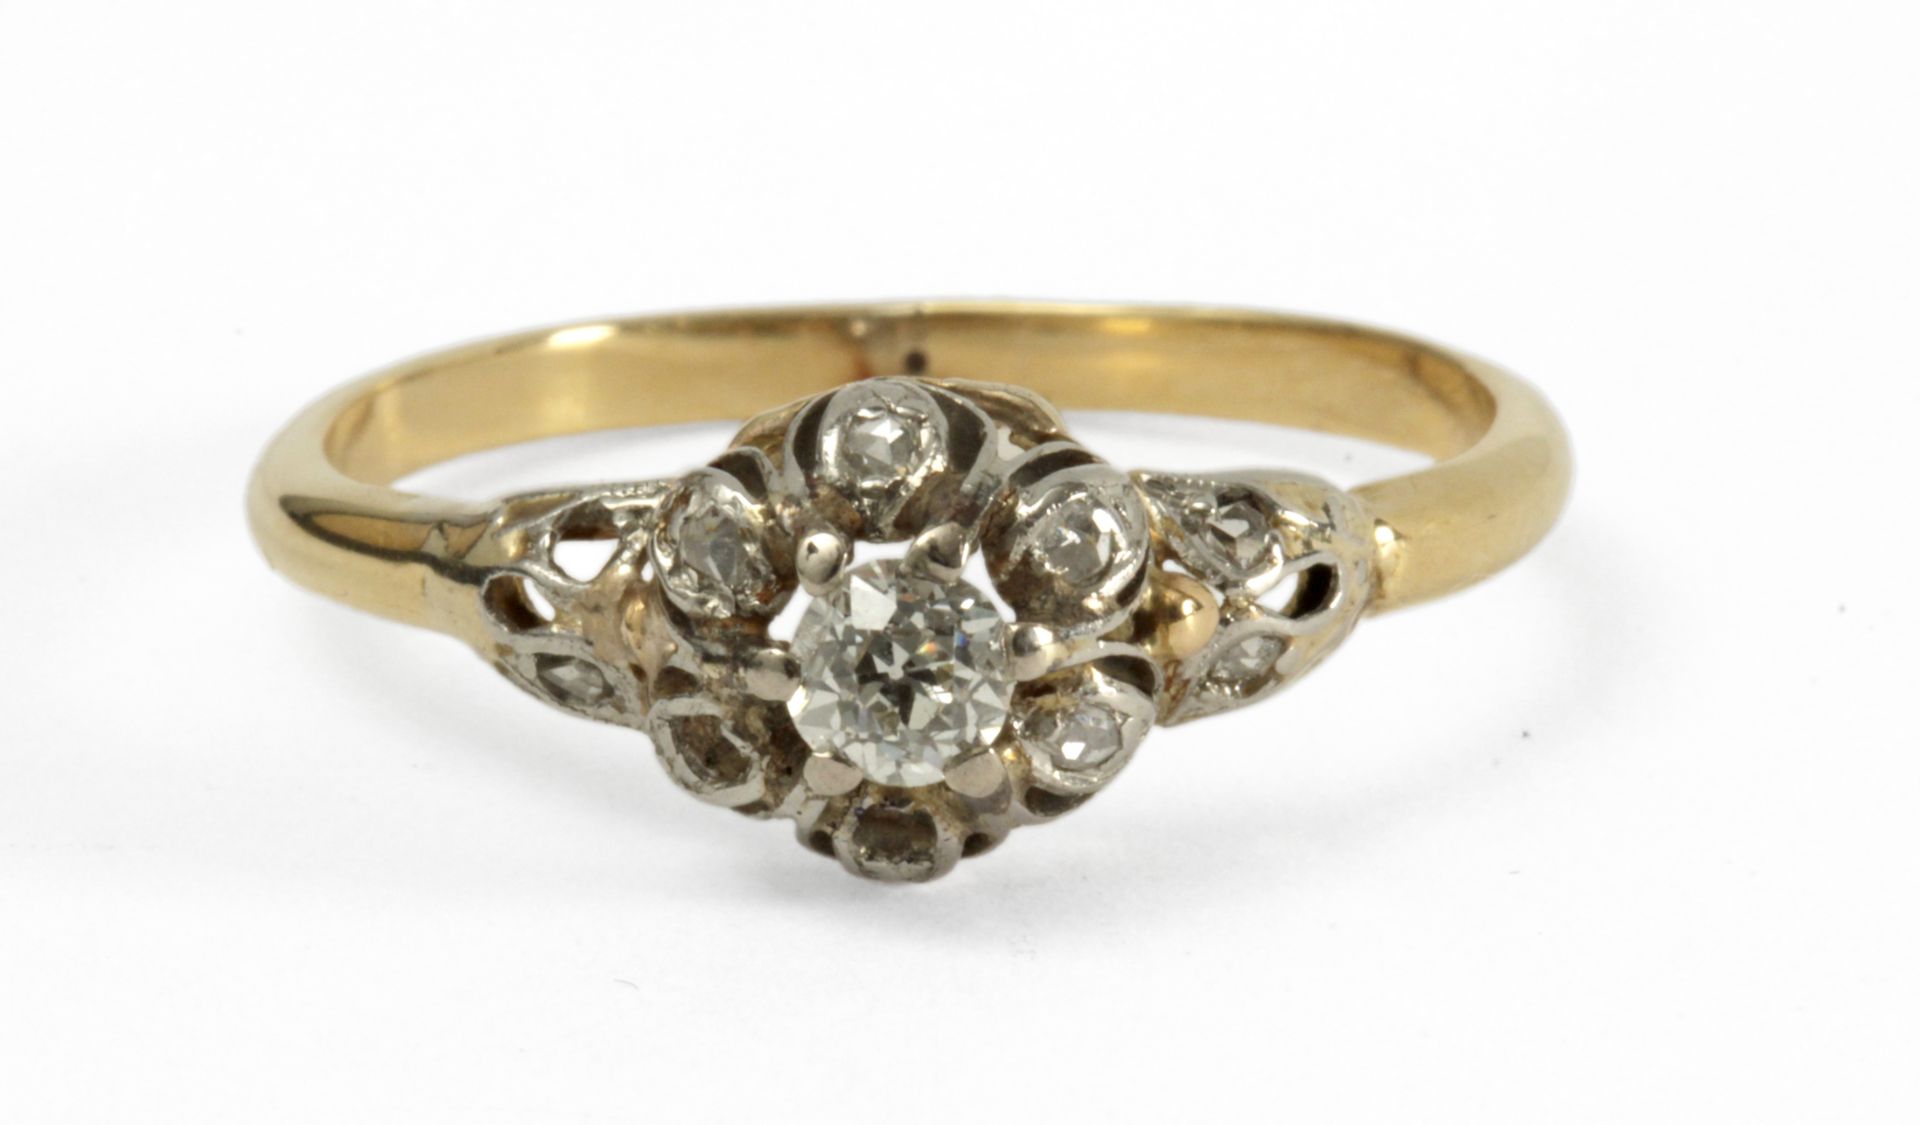 A first half of 20th century diamond ring with an 18 k. yellow gold setting